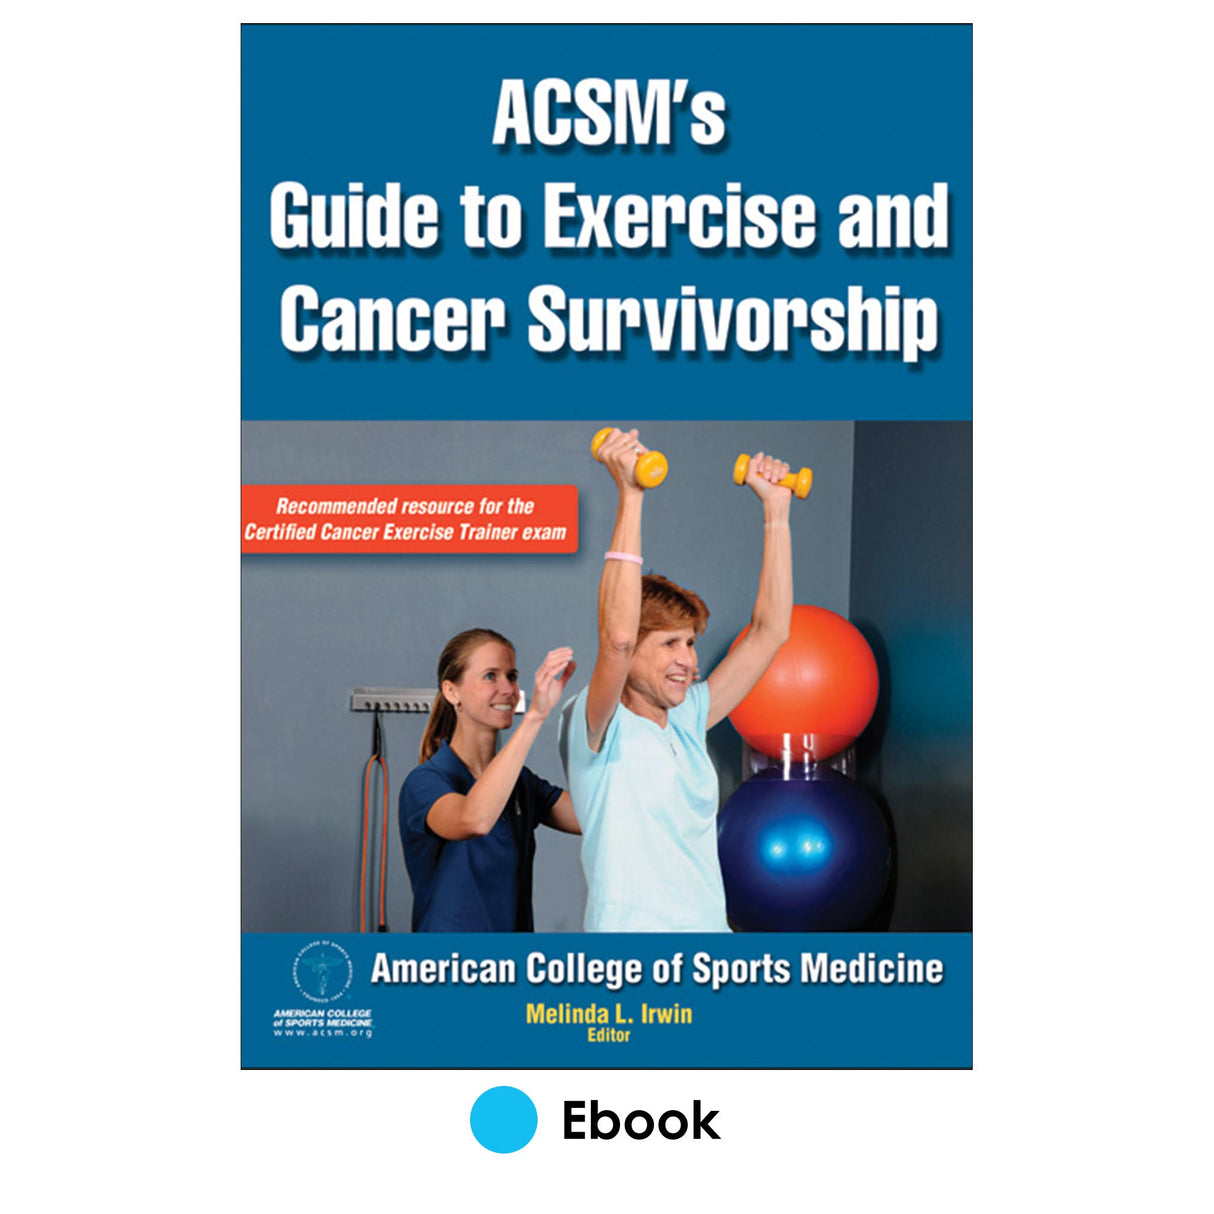 ACSM's Guide to Exercise and Cancer Survivorship PDF